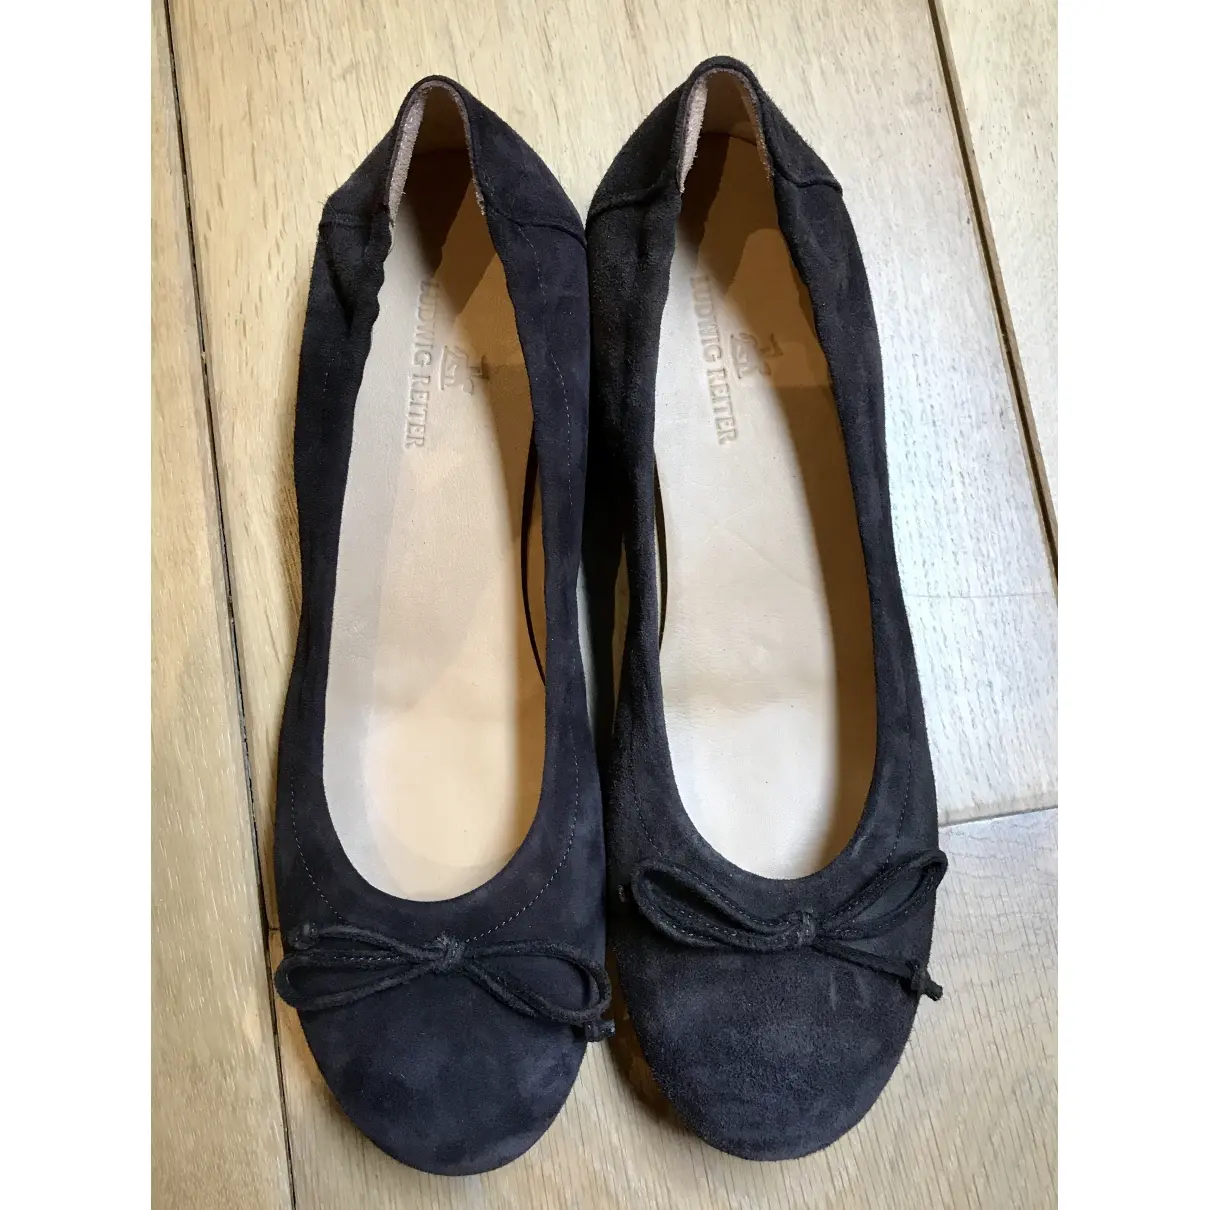 Ludwig Reiter Ballet flats for sale